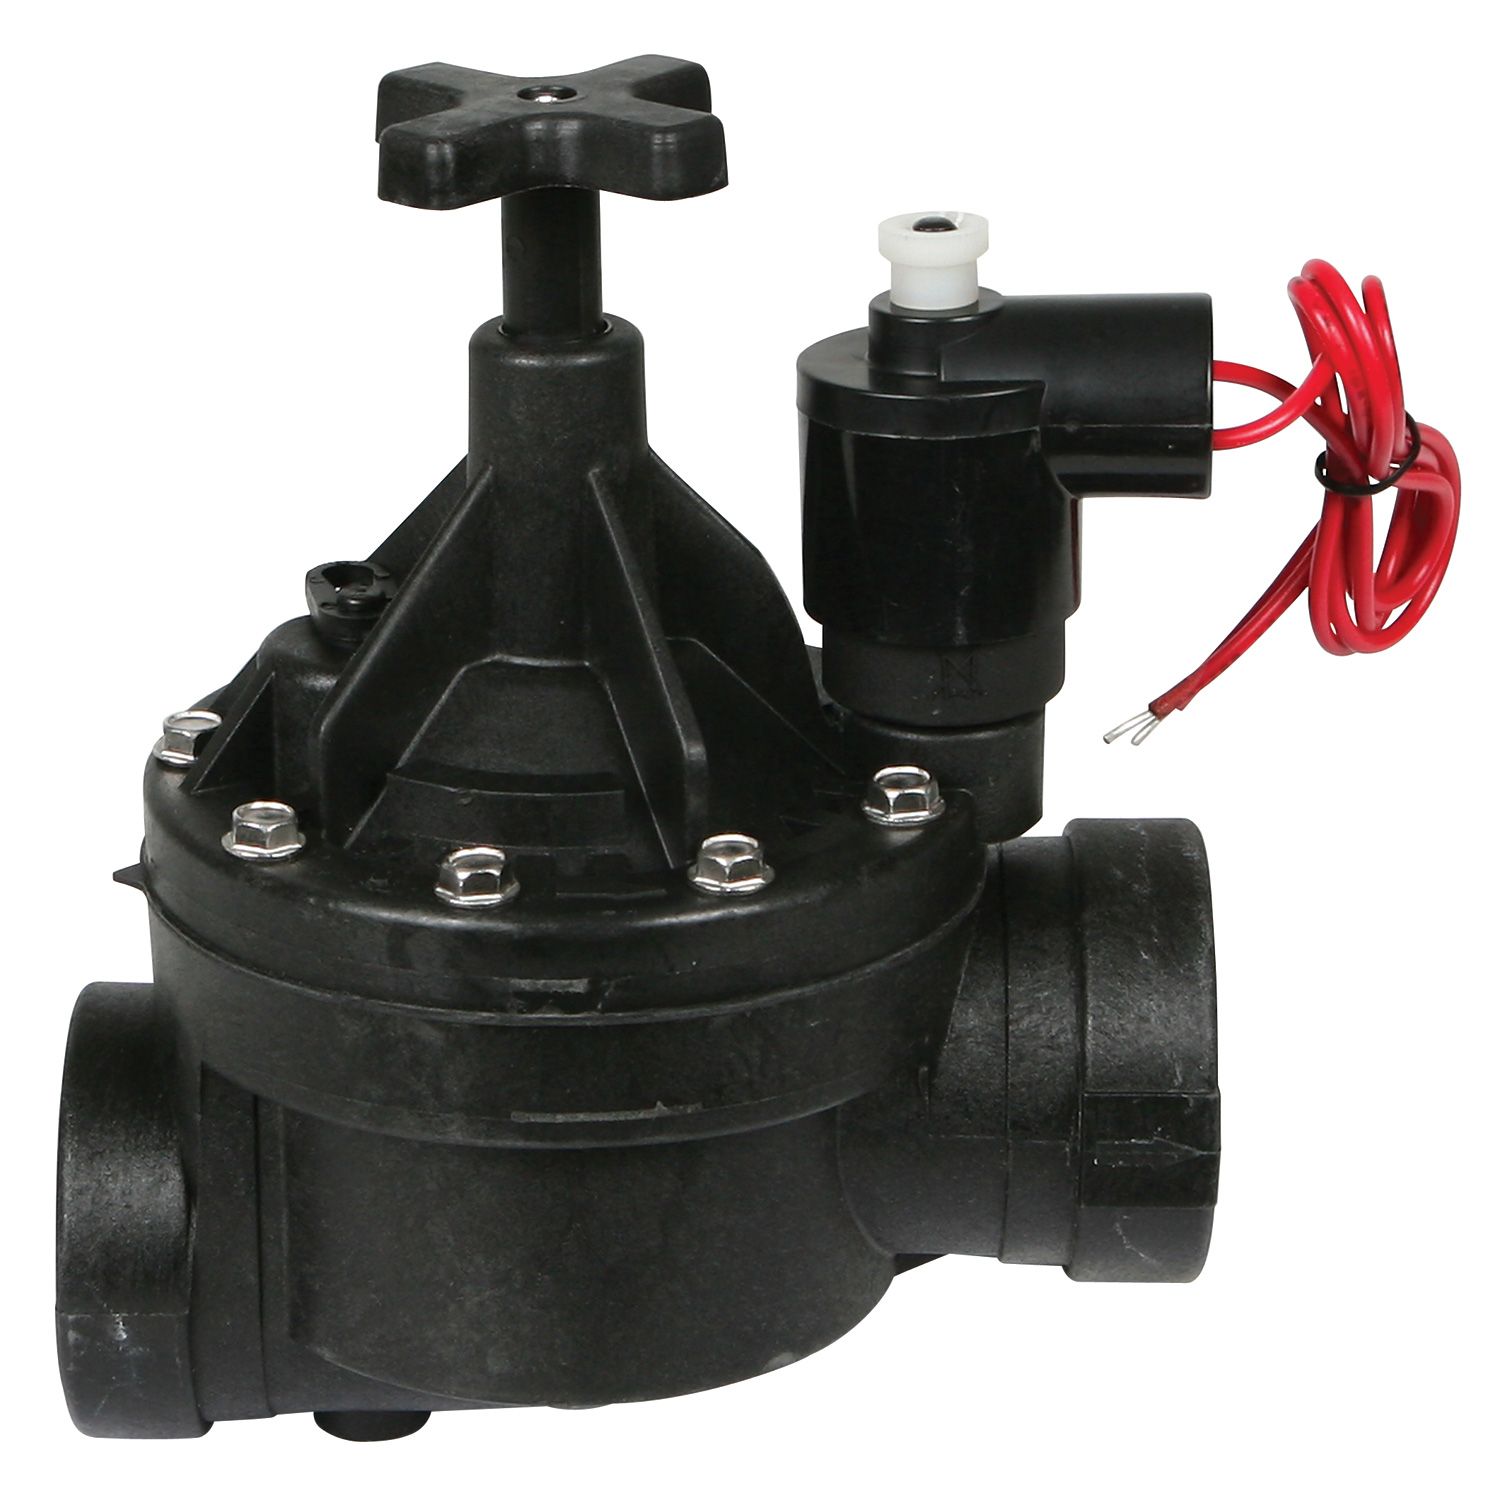 Fydun 1/2 AC 220V Normally Closed Brass Electric Solenoid Magnetic Valve Water Valve Push to Connect for Water Control Water Valve 